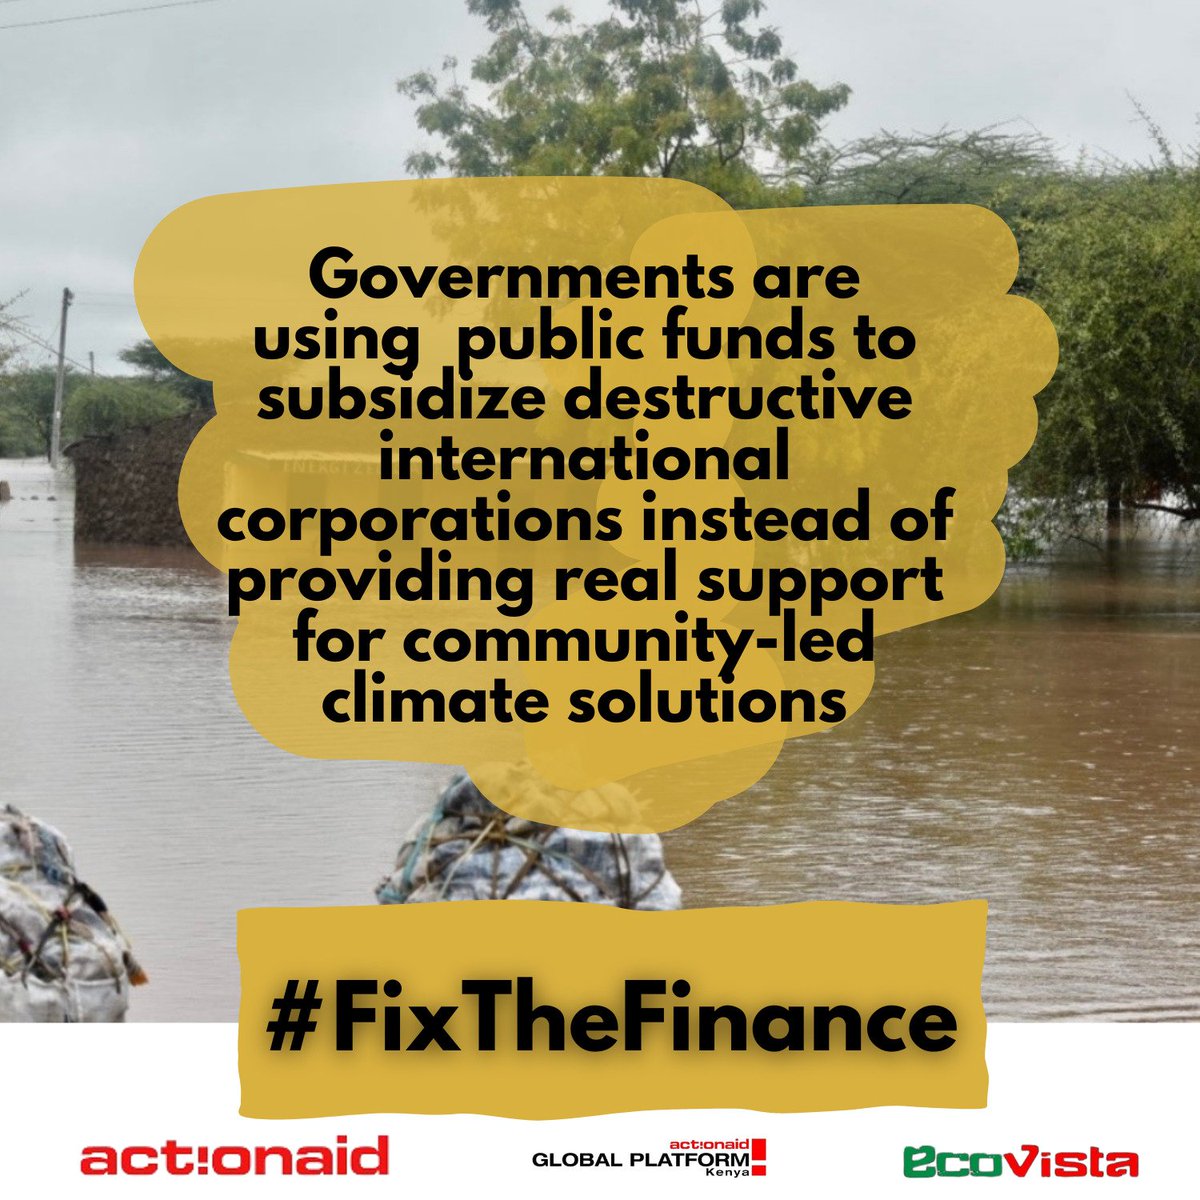 End Fossil Fuel Now! Pro people initiatives towards climate crisis mitigation is crucial more than ever. #ForPeopleForPlanet #FixTheFinance Fund Our Future @PlatformsGlobal @COP29_Az @Barclays, @HSBC, @HSBC_UK @Citi @christian_aid @Oxfam @Fridays4Future @EcoVistaKE